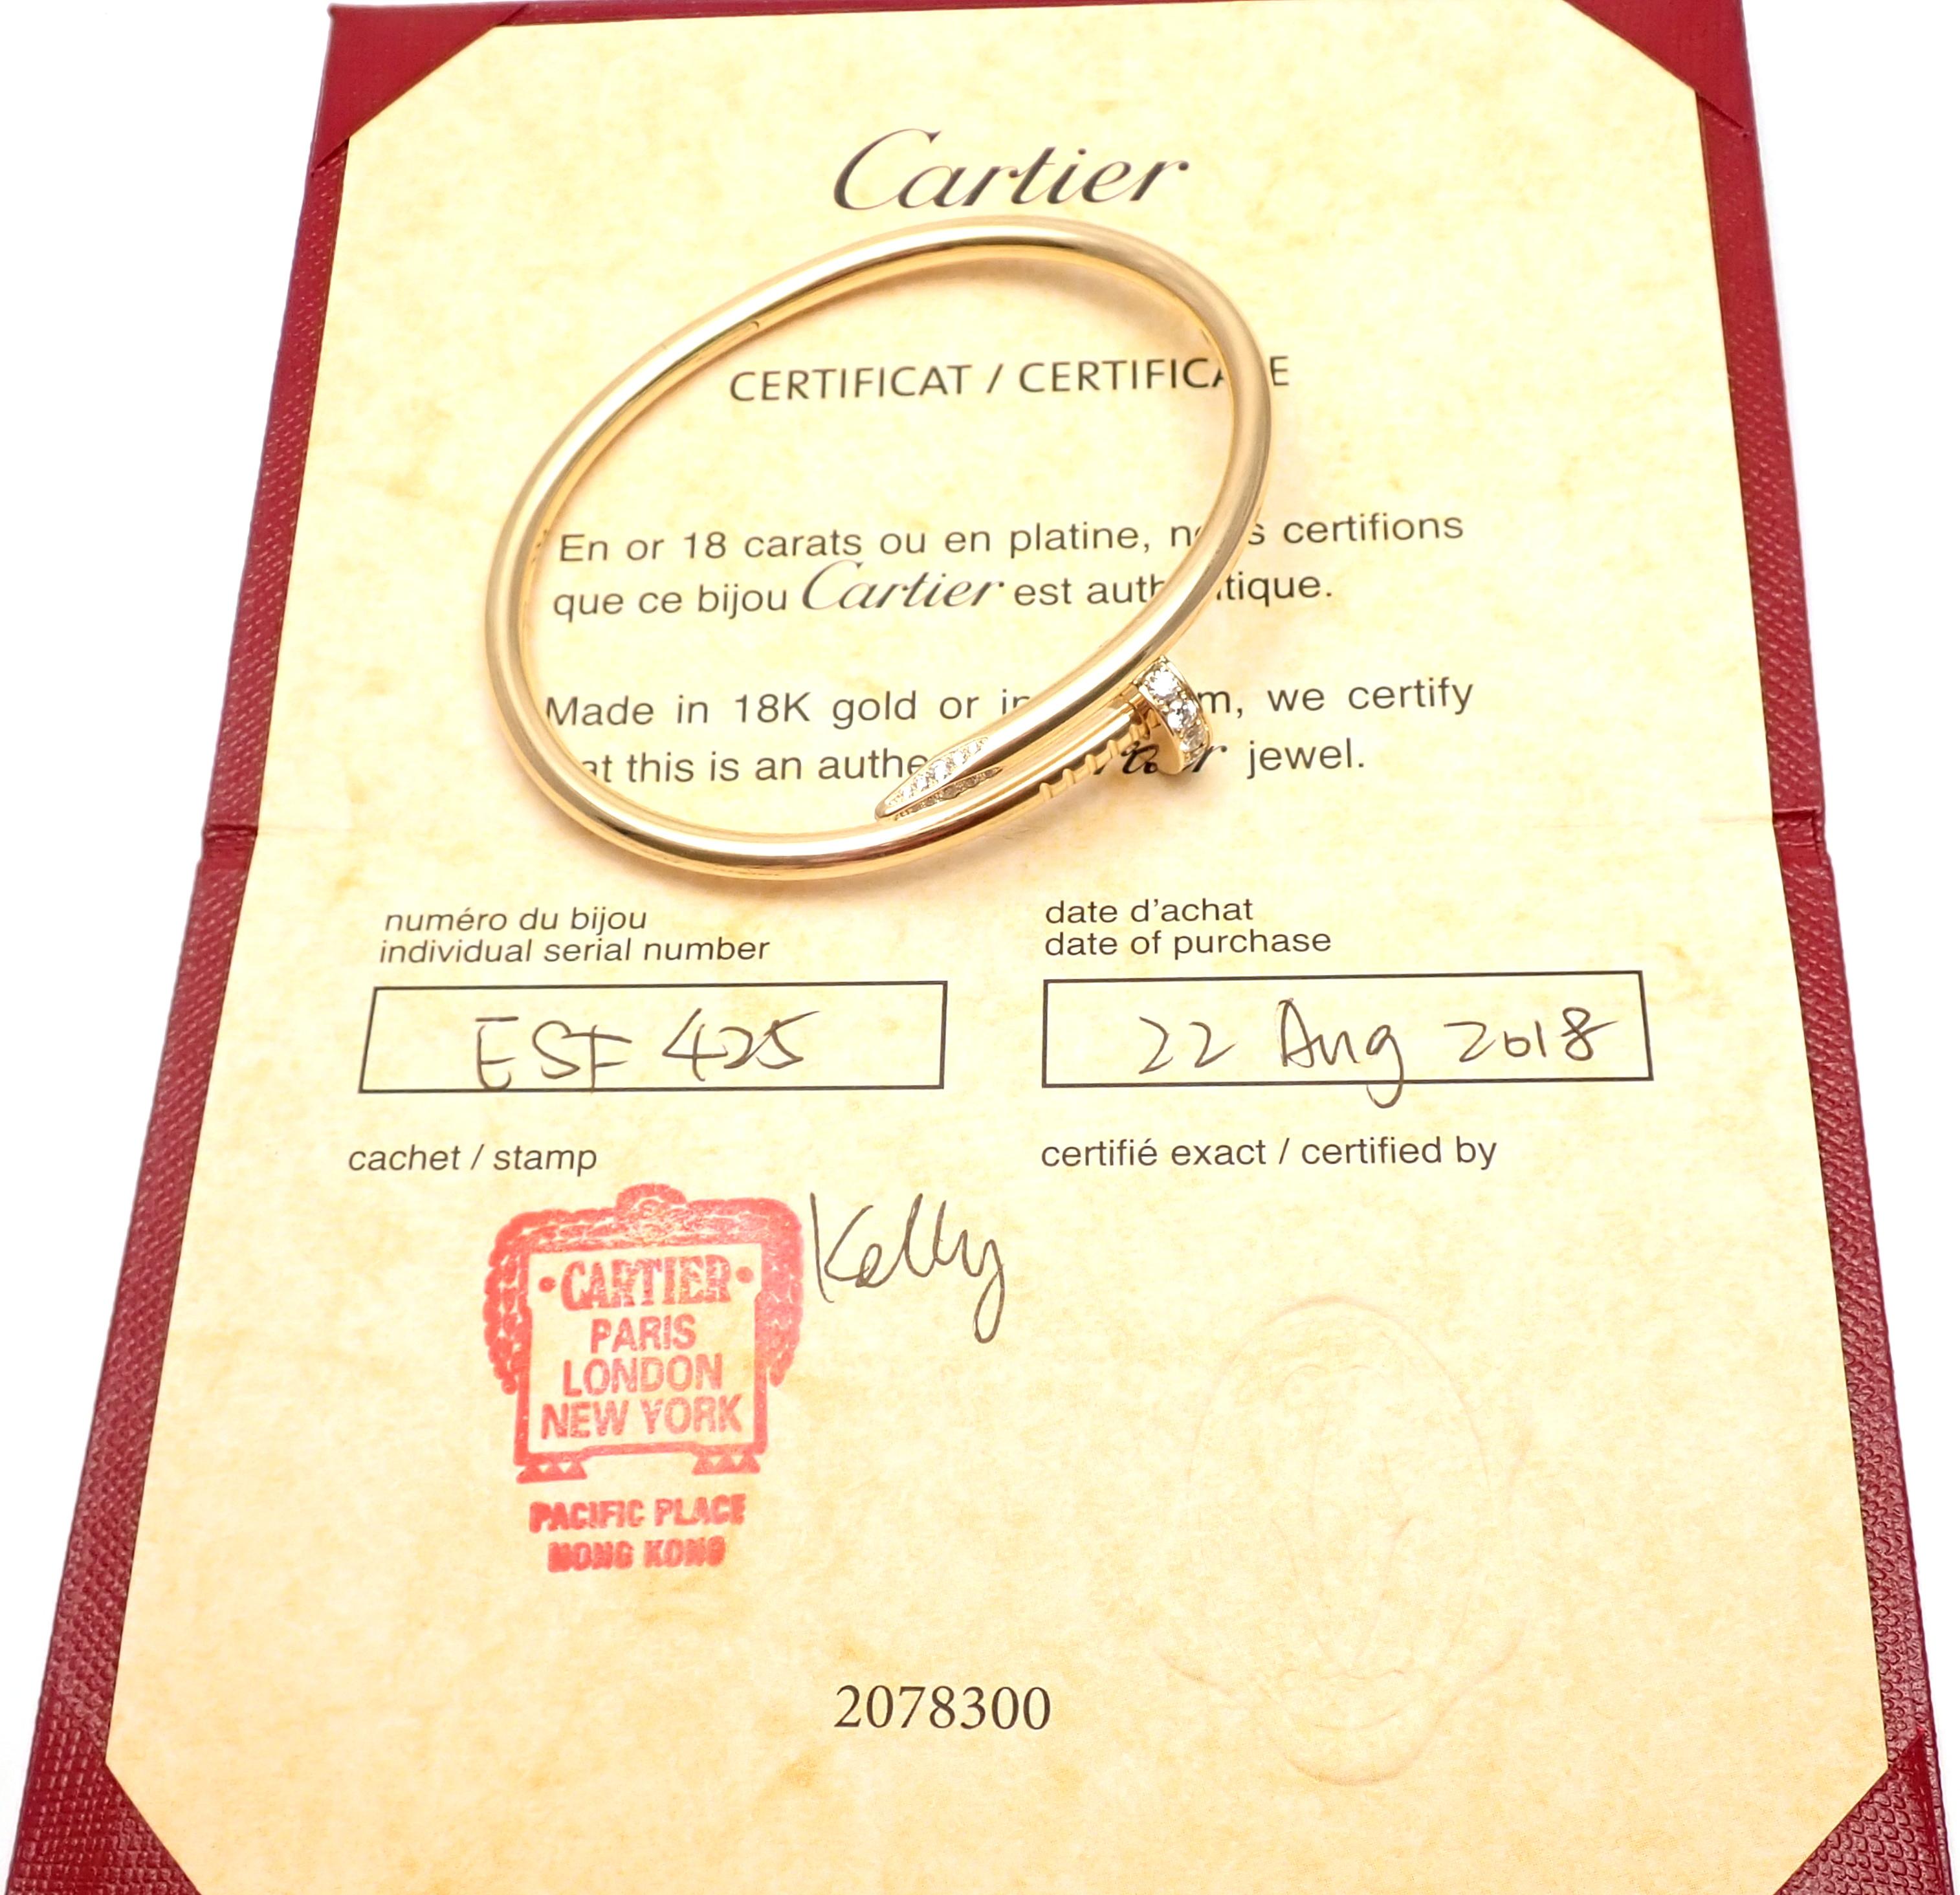 18k Yellow Gold Diamond Juste Un Clou Nail Bangle Bracelet Size 17 by CARTIER. 
This beautiful bracelet comes with its Cartier box and Cartier certificate.
With 32 round brilliant cut diamonds E color, VVS1 clarity total weight approx.